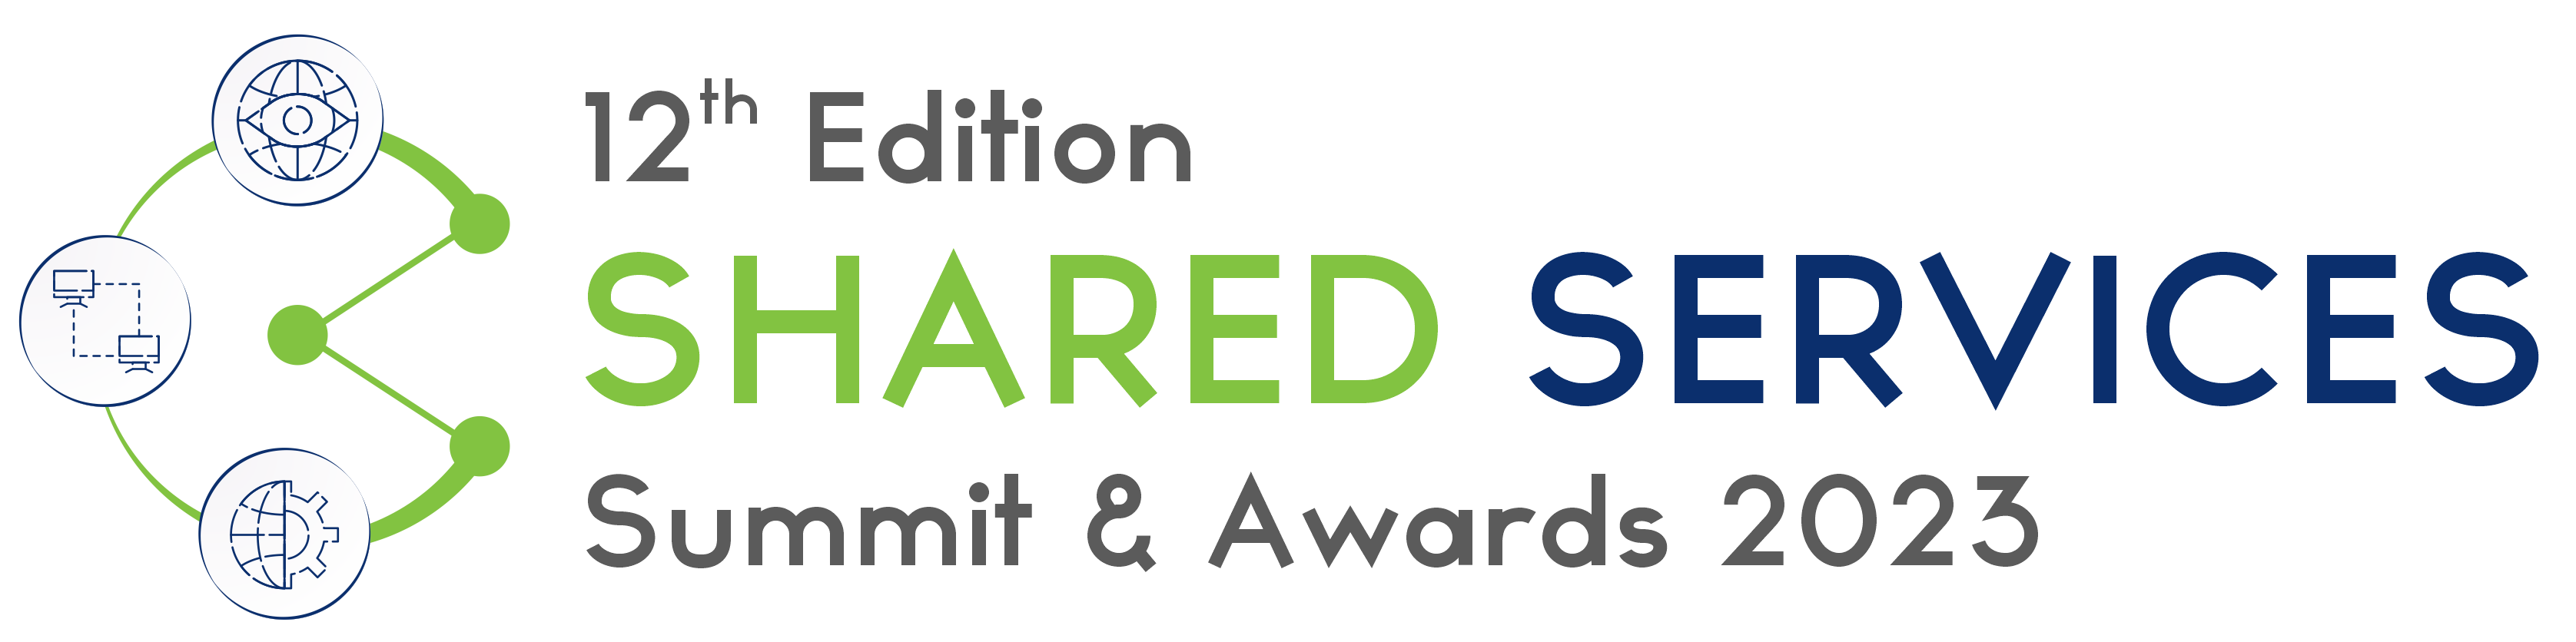 12th Edition Shared Service Summit and Awards 2023